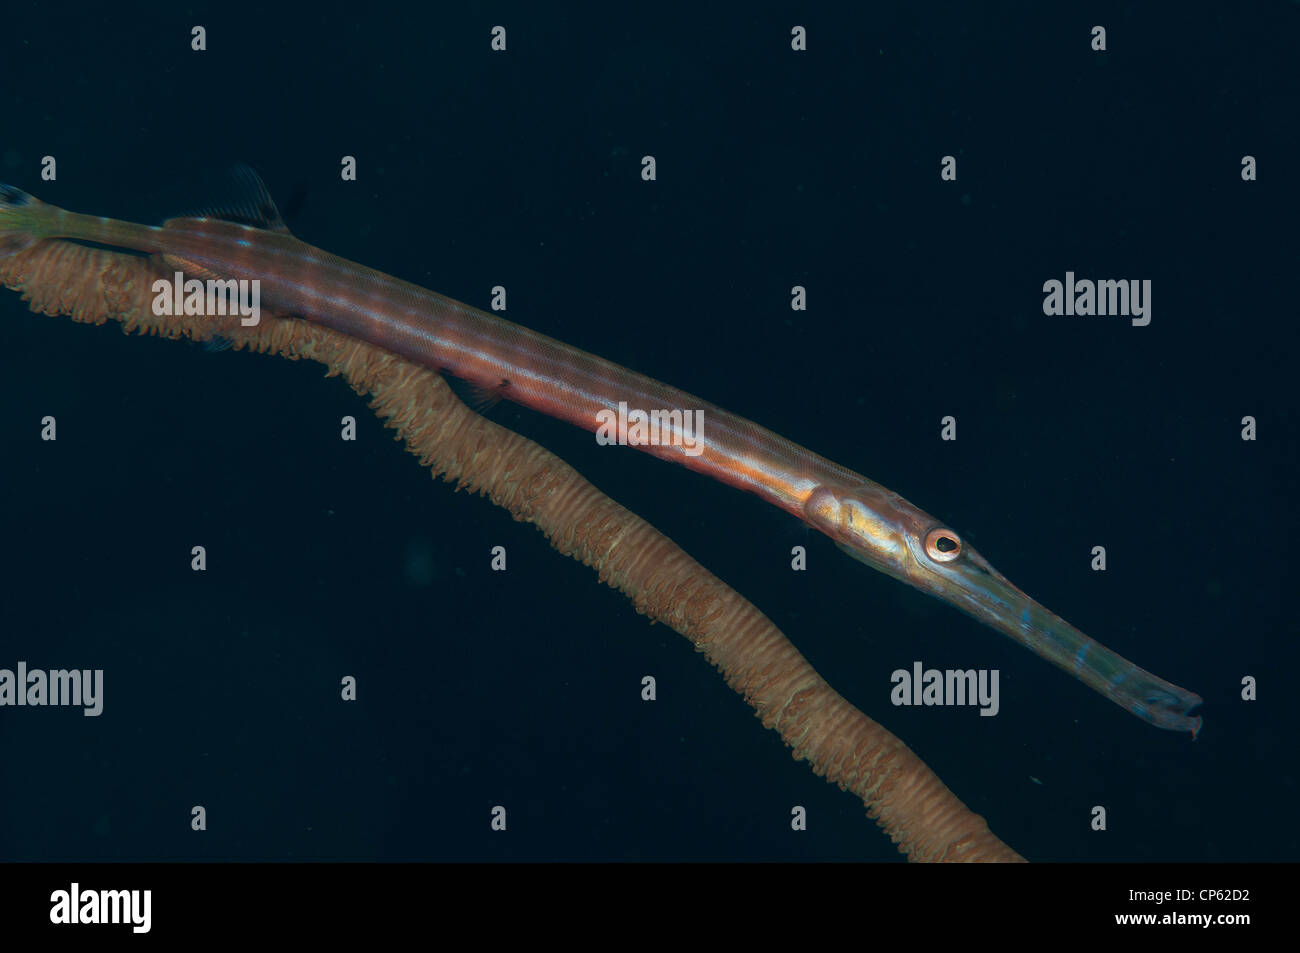 Trumpetfish (Aulostomus maculatus) using a whip coral as camouflage Stock Photo